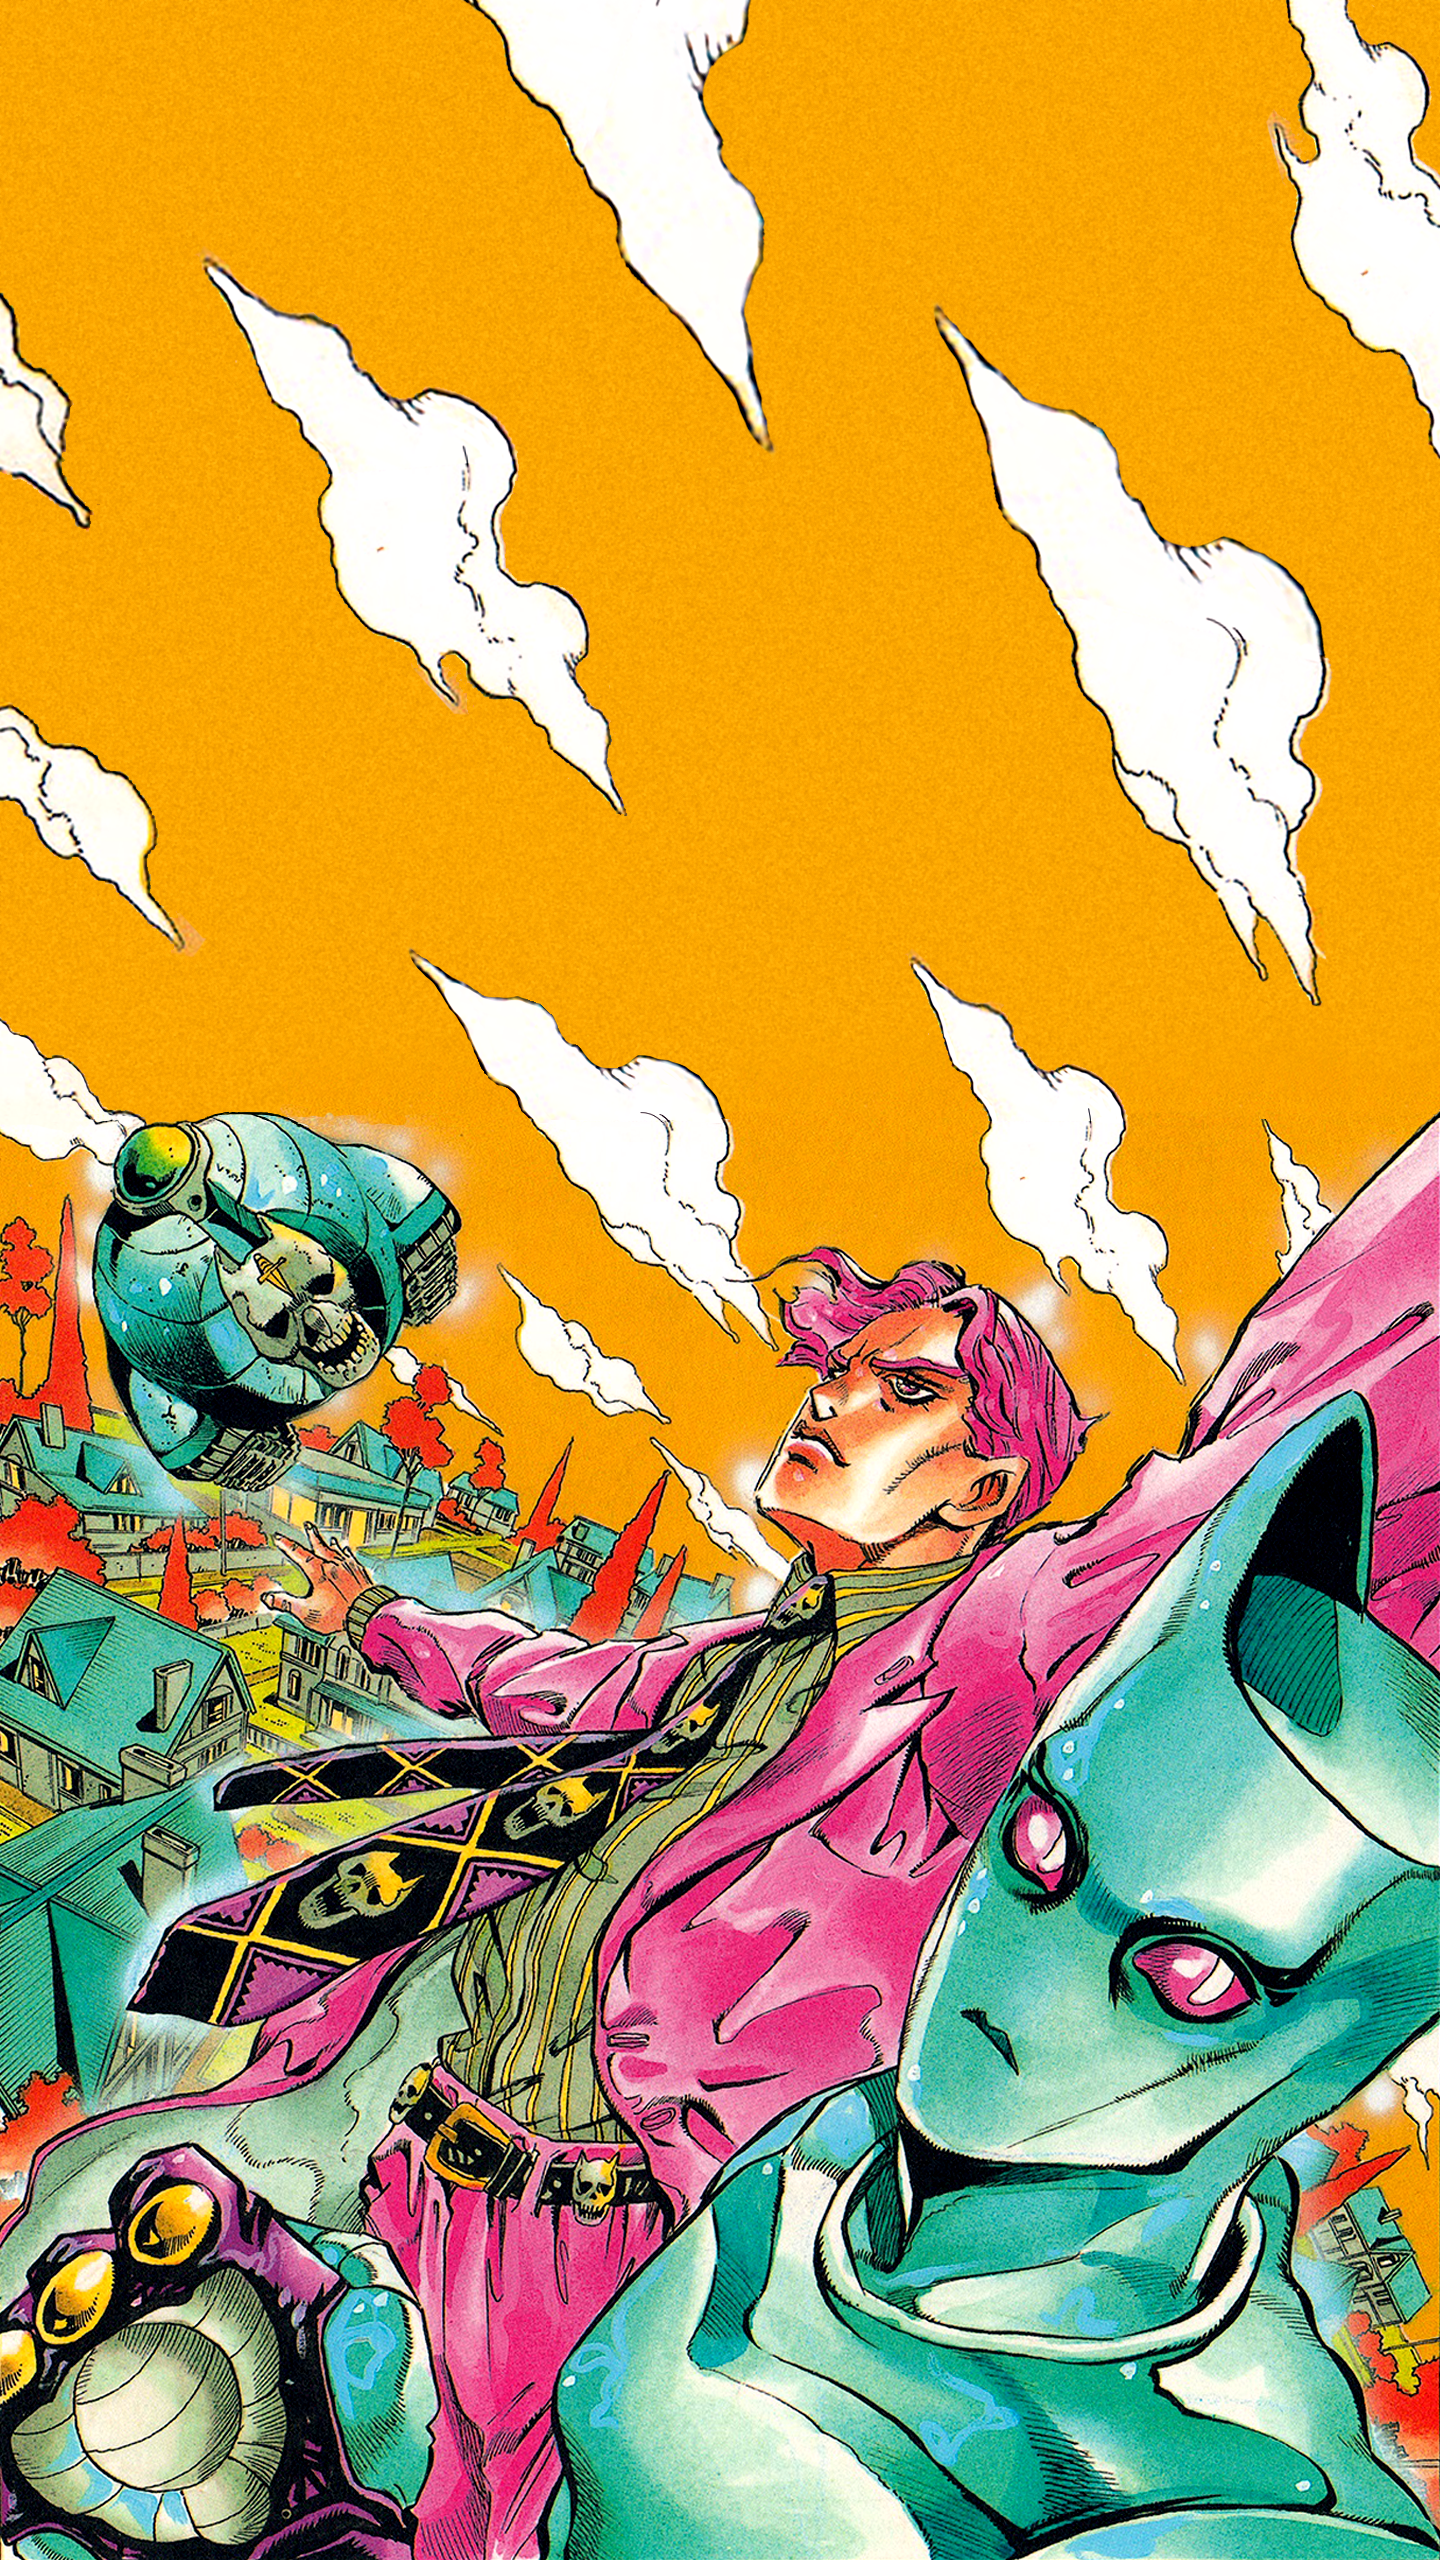 Posting a wallpaper a day until stone ocean is animated day 70: Kira and Killer Queen